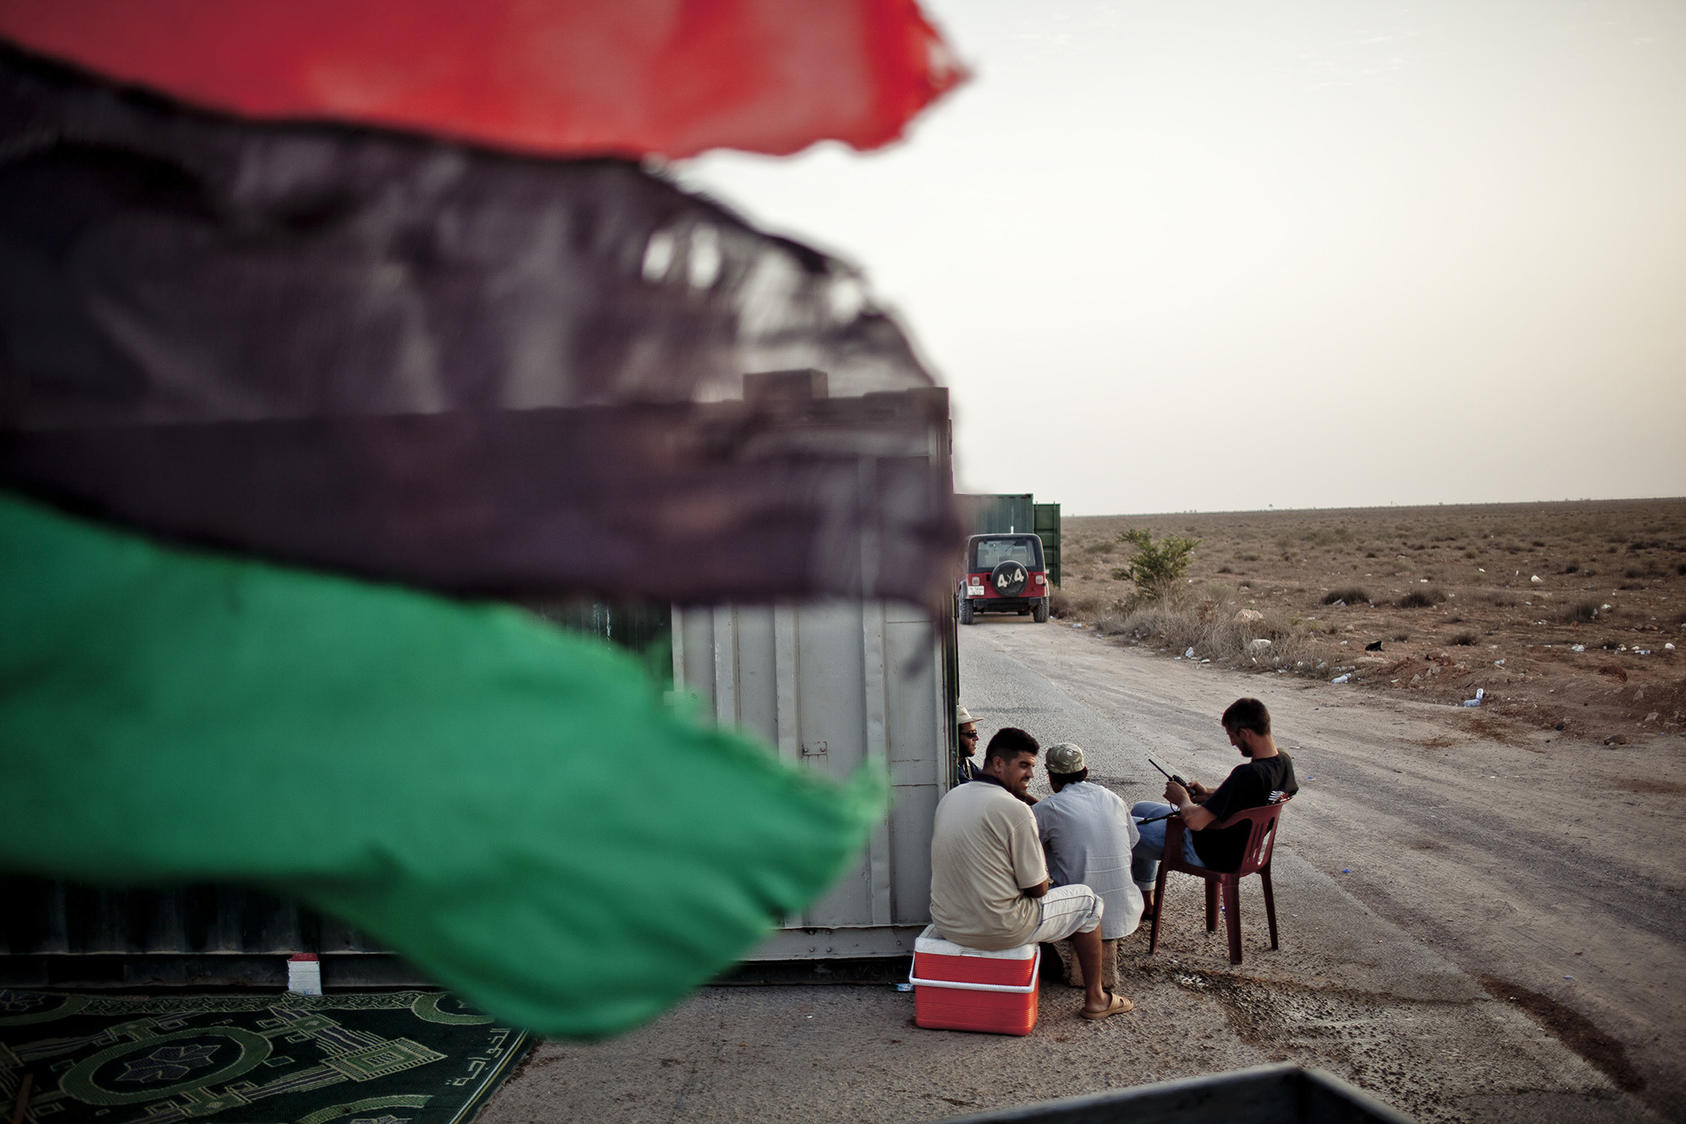 Rebels guard the last checkpoint between Misrata and Bani Walid on the outskirts of Abdul Rauf, Libya, Sept. 5, 2011. (Bryan Denton/The New York Times)